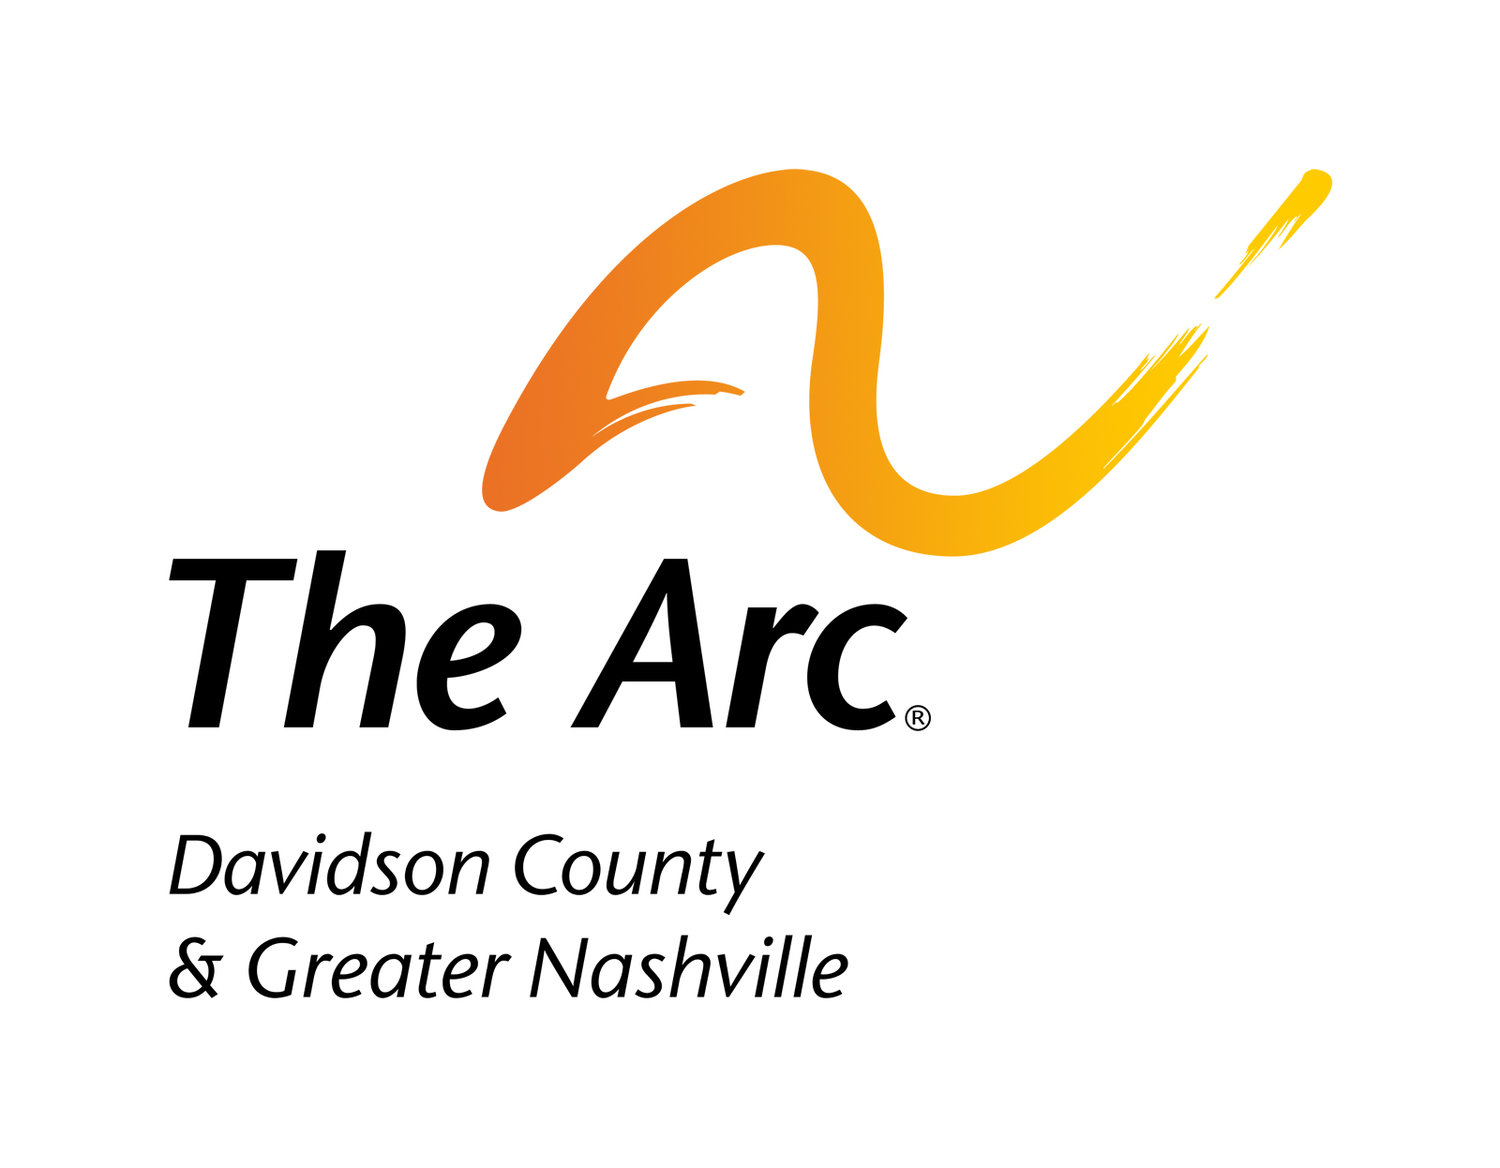 The Arc Davidson County and Greater Nashville